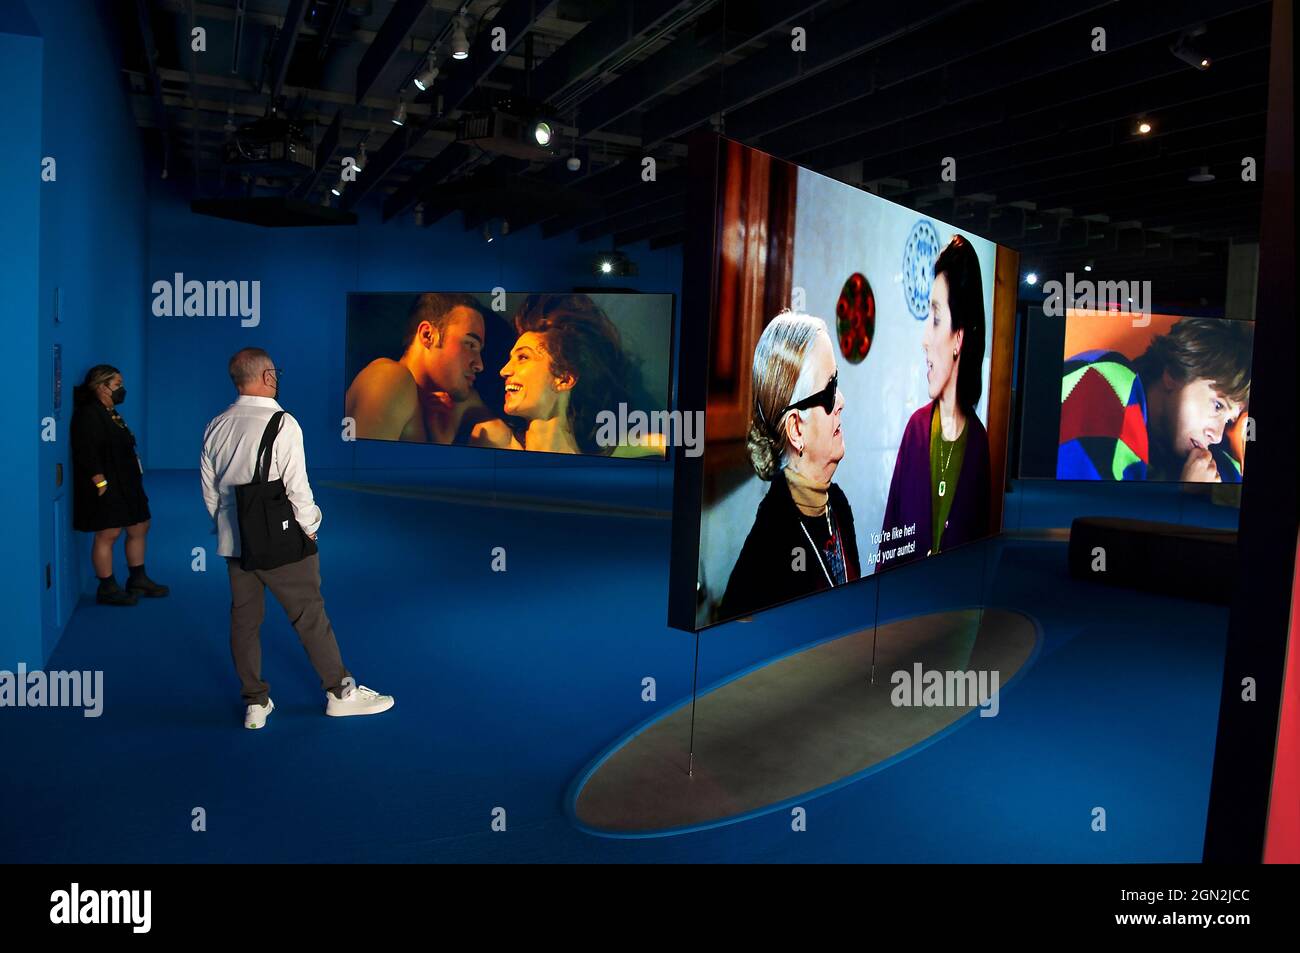 Exhibition honoring director Pedro Almodovar at the Academy Museum of Motion Pictures, Los Angeles, California Stock Photo